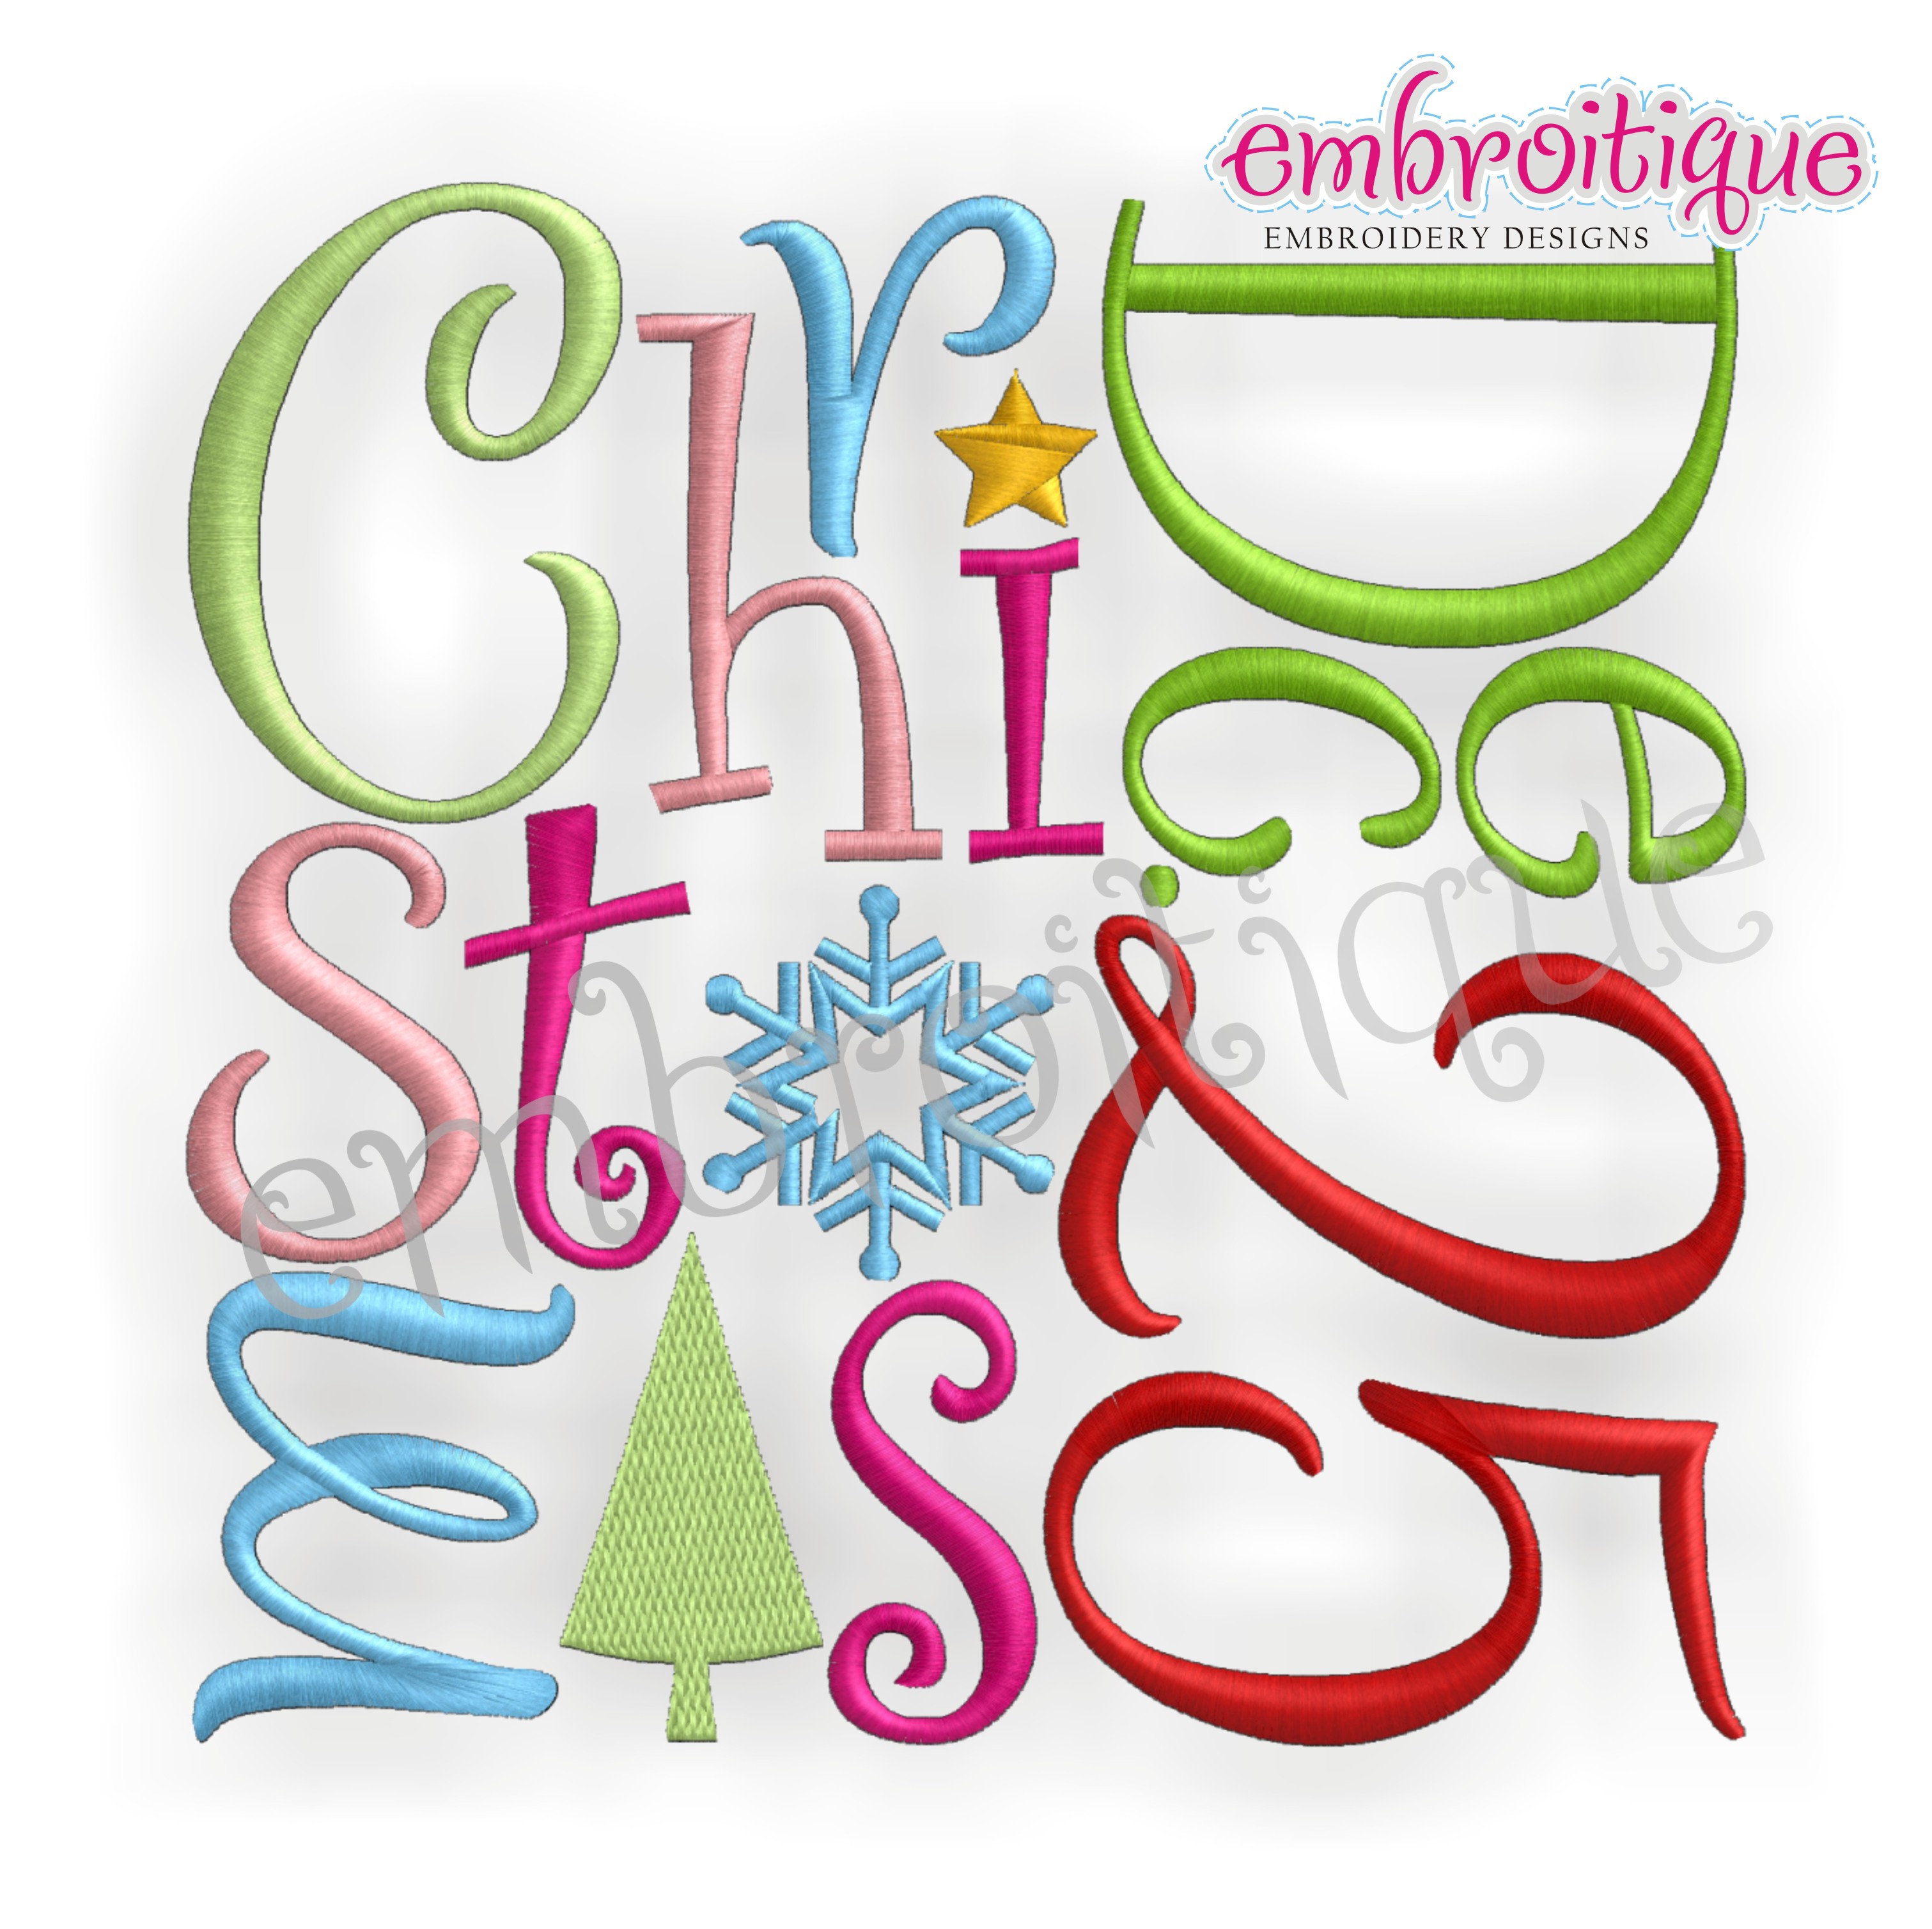 Free Christmas Fonts for Microsoft Word